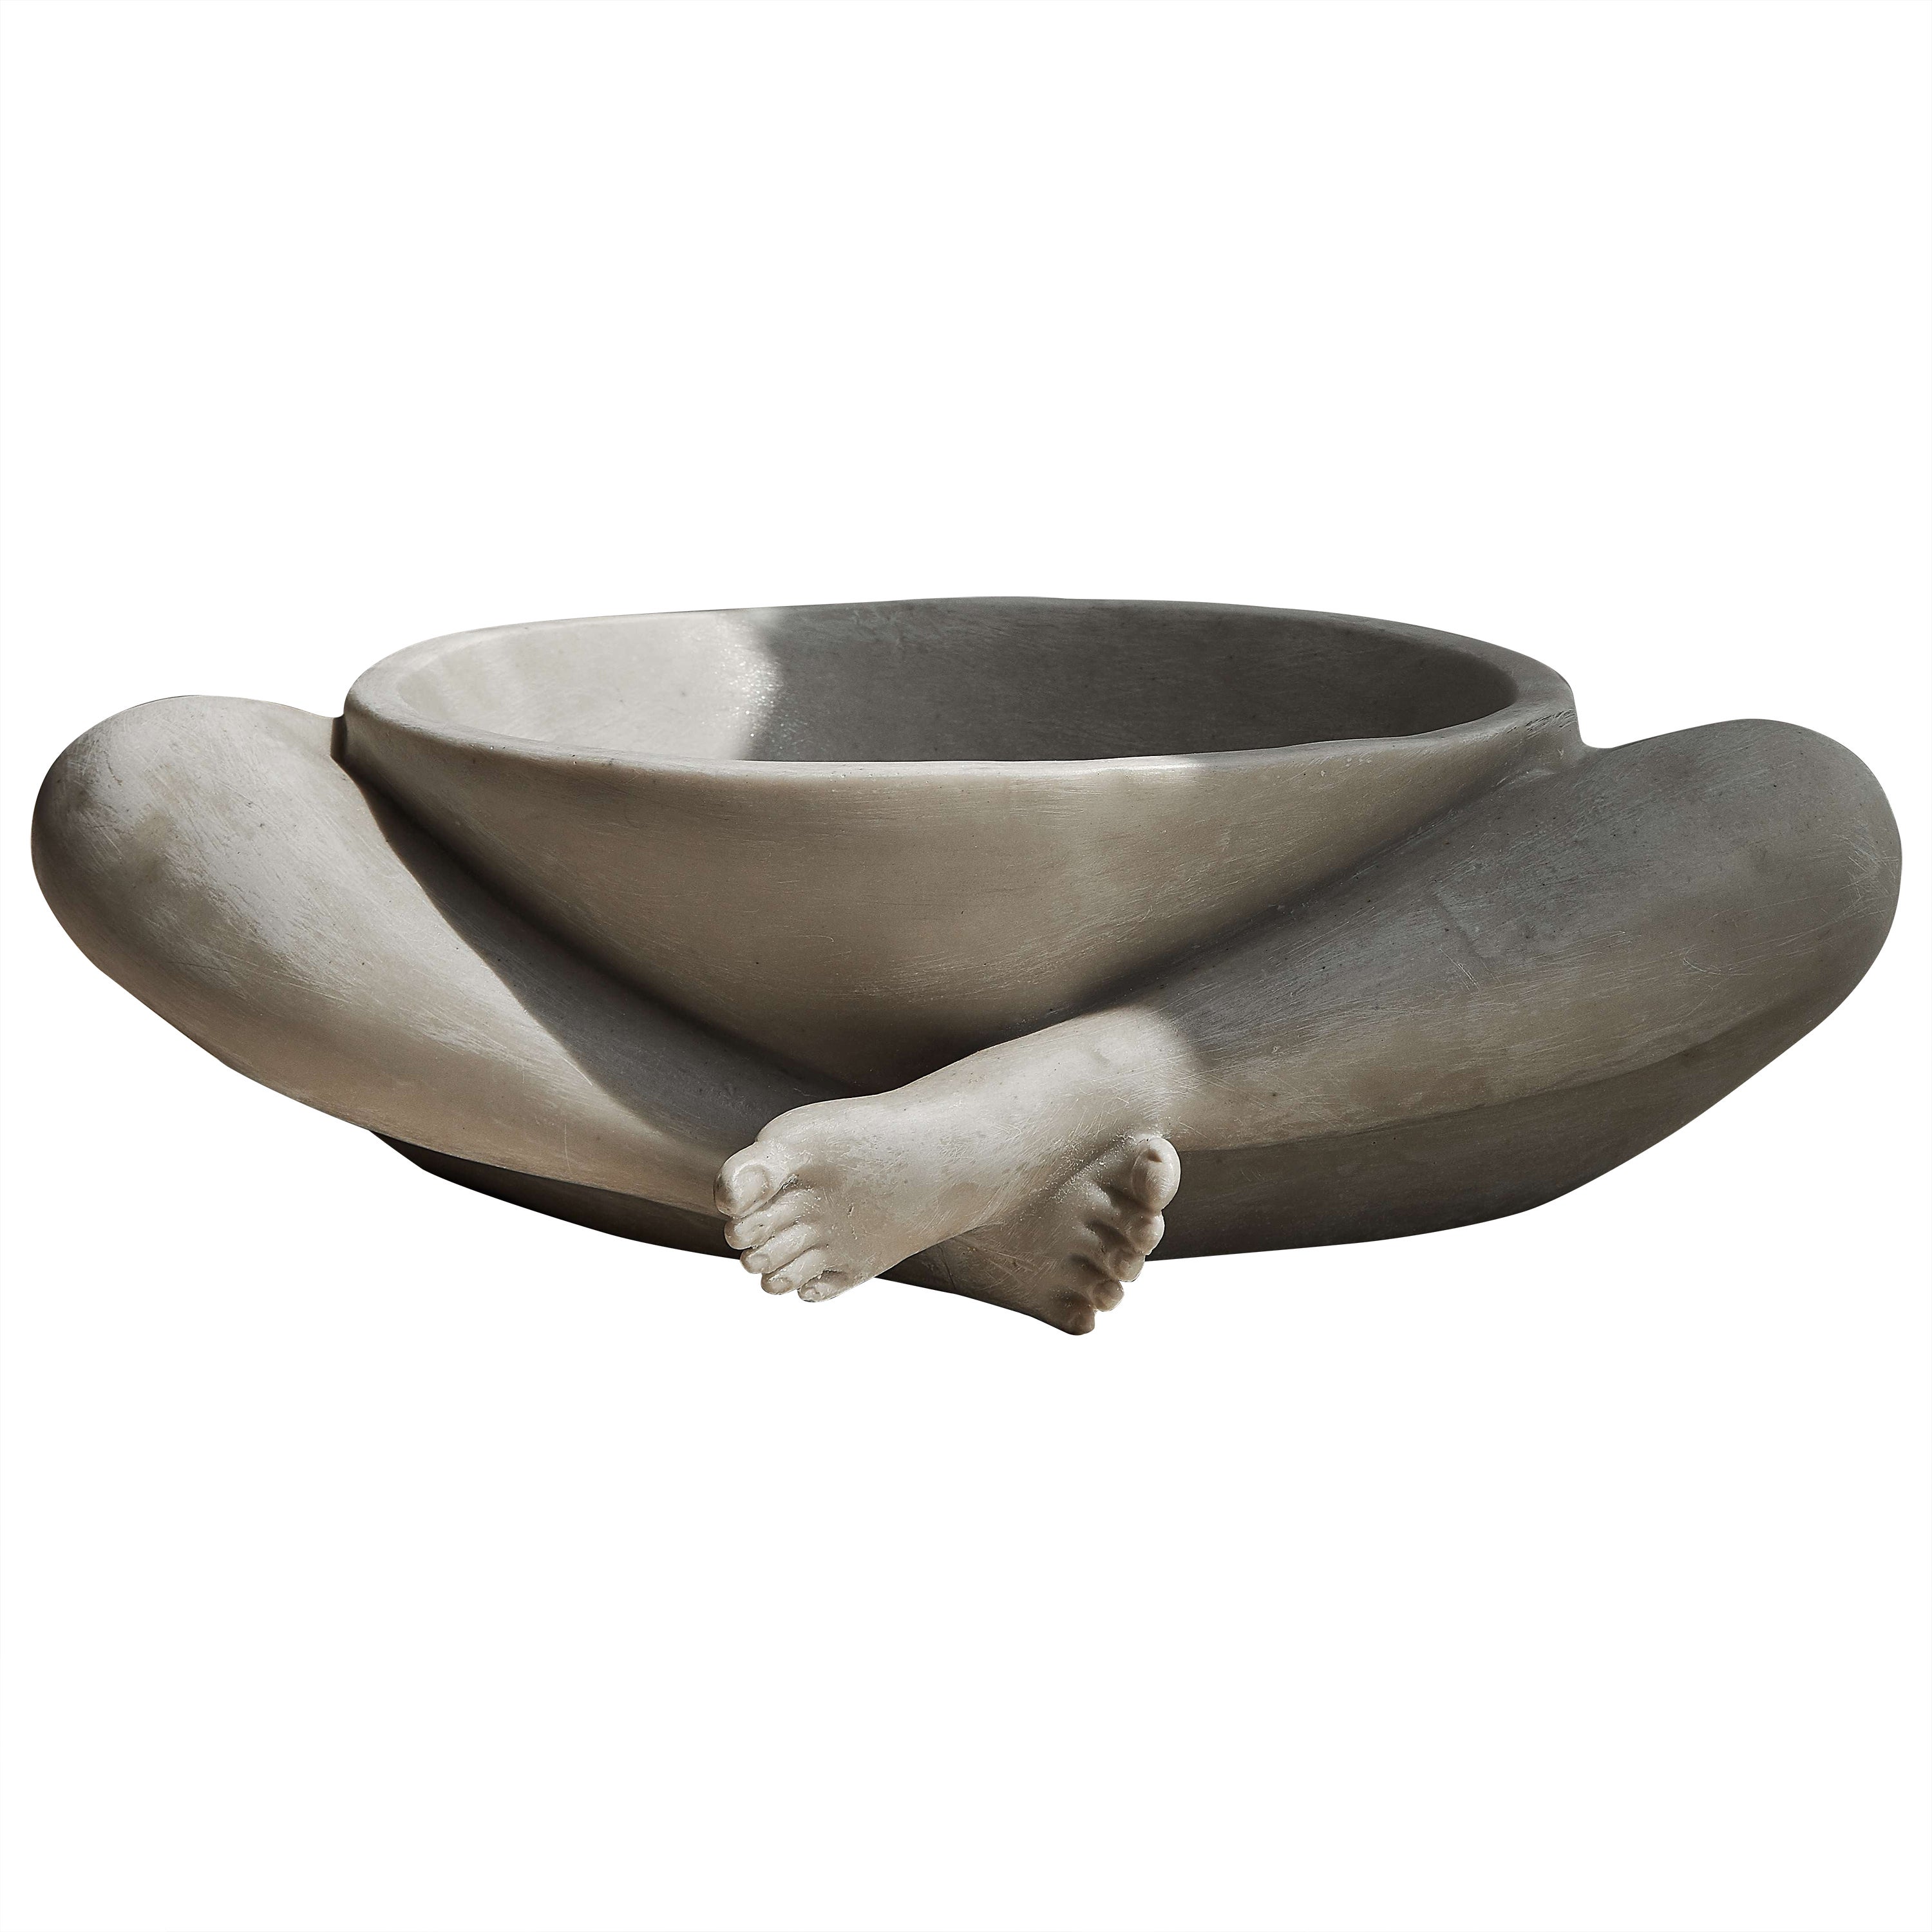 Meditative Pose Sculptural Legs Bowl Sukhasana II S Hand-Crafted Resin + Stone For Sale